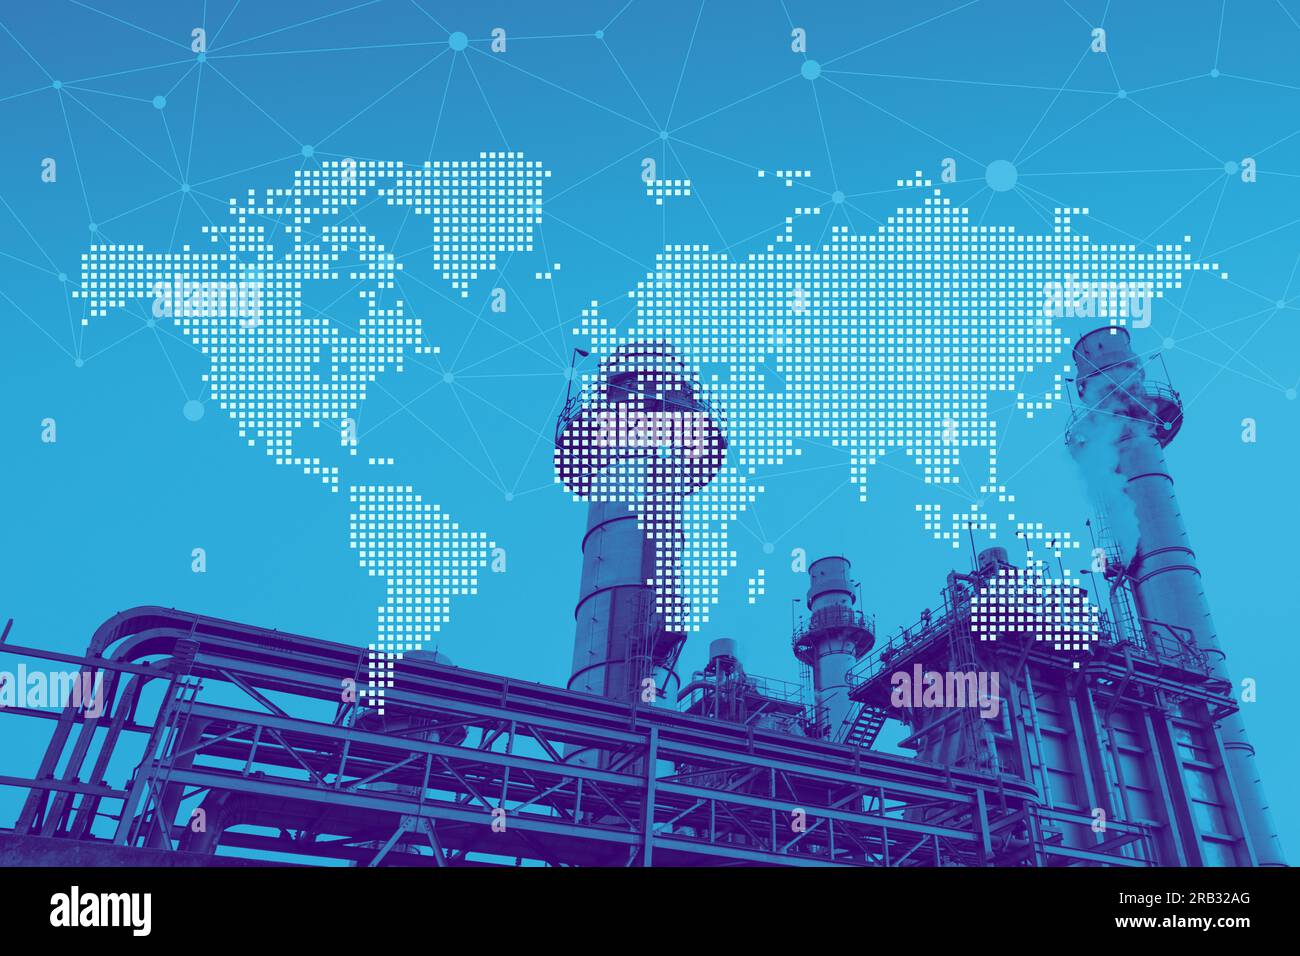 Power plant petroleum gas oil chemical factory overlay world map for worldwide business industry logistics concept. Stock Photo